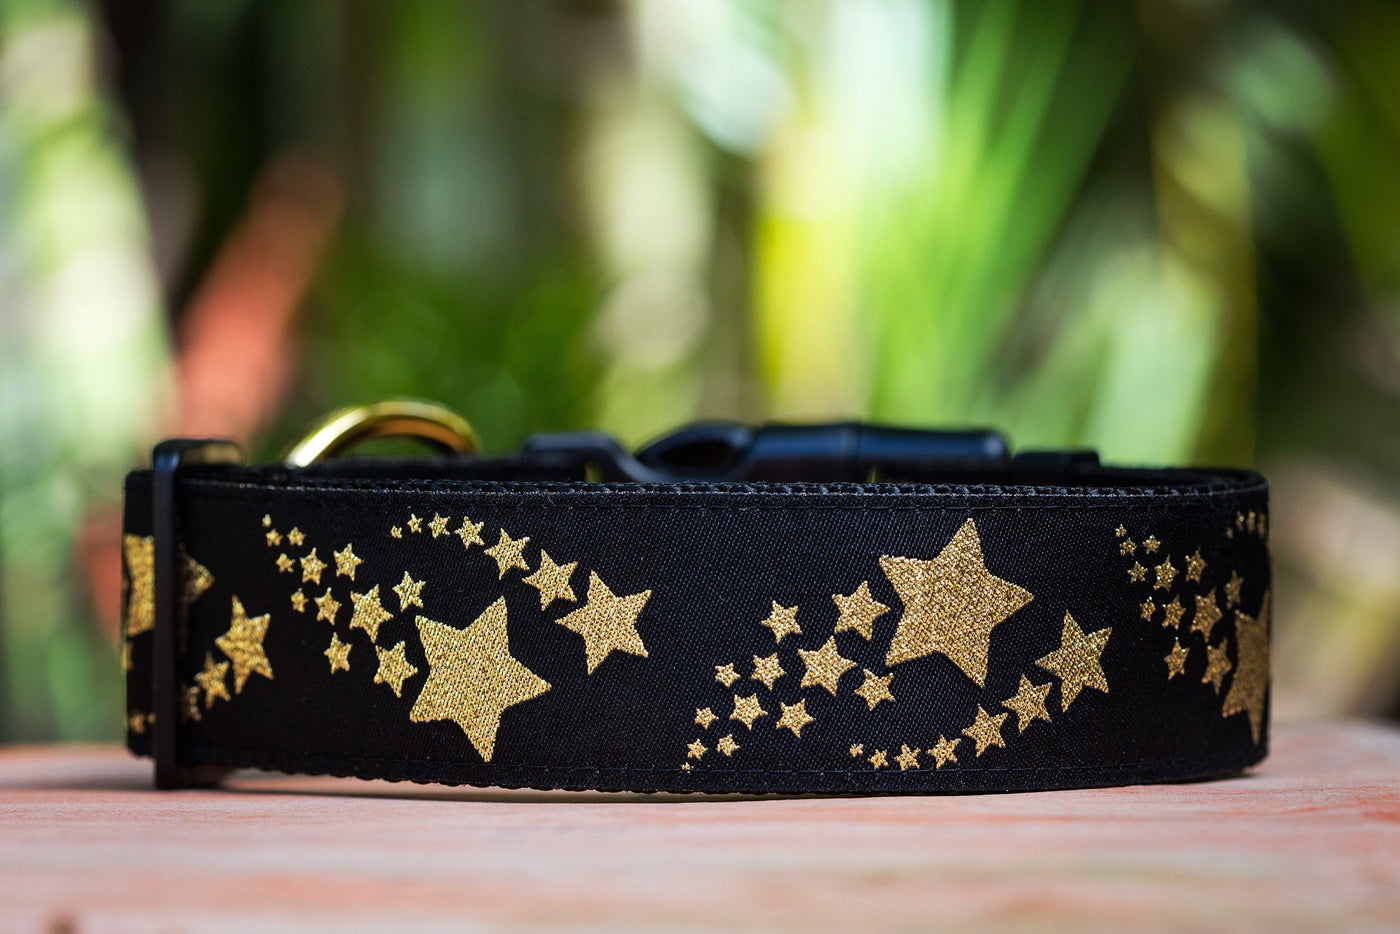 dog collars made in Australia, featuring golden shooting stars pattern. A high quality and unique dog collar.